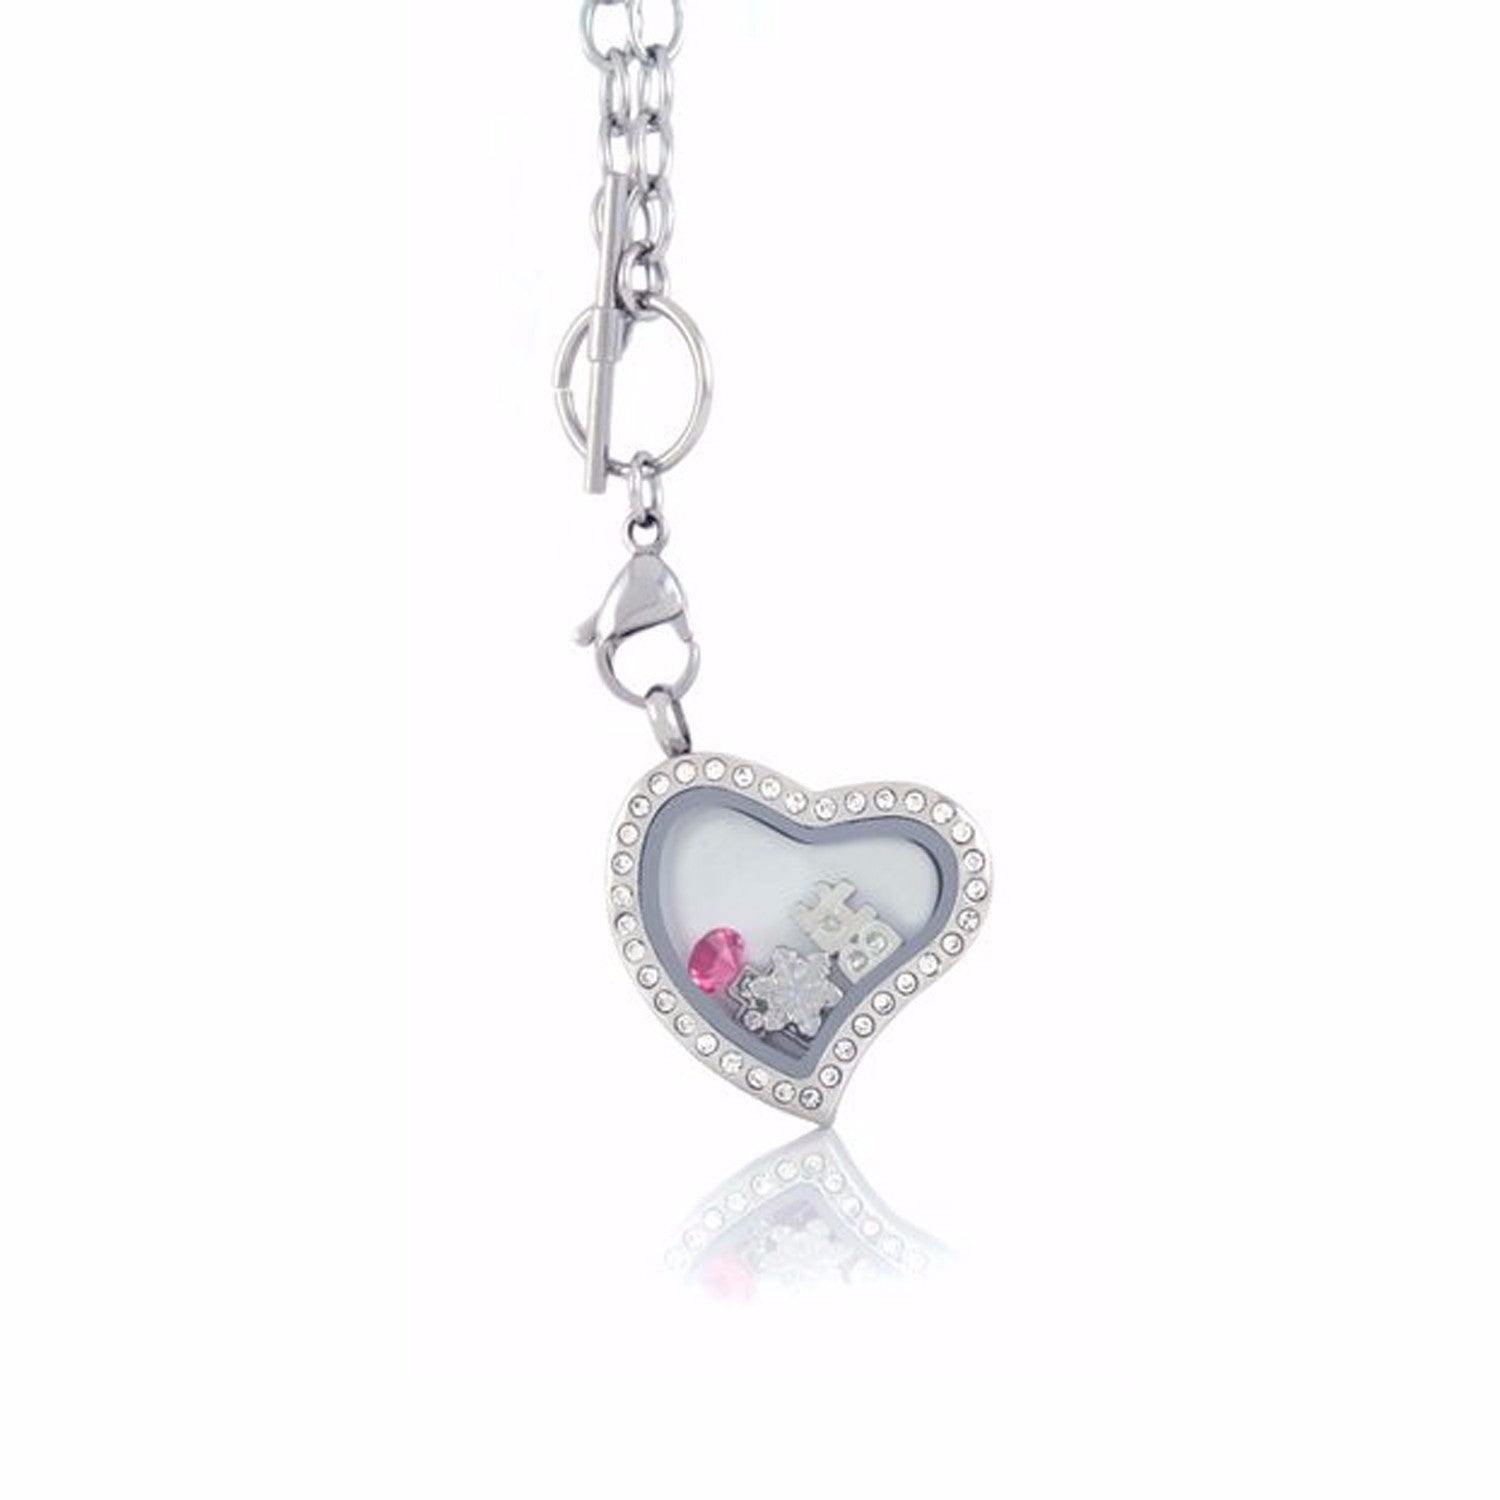 Floating Heart Locket with Choice of 6 Charms and Matching Toggle Chain (Silver Toggle Heart)